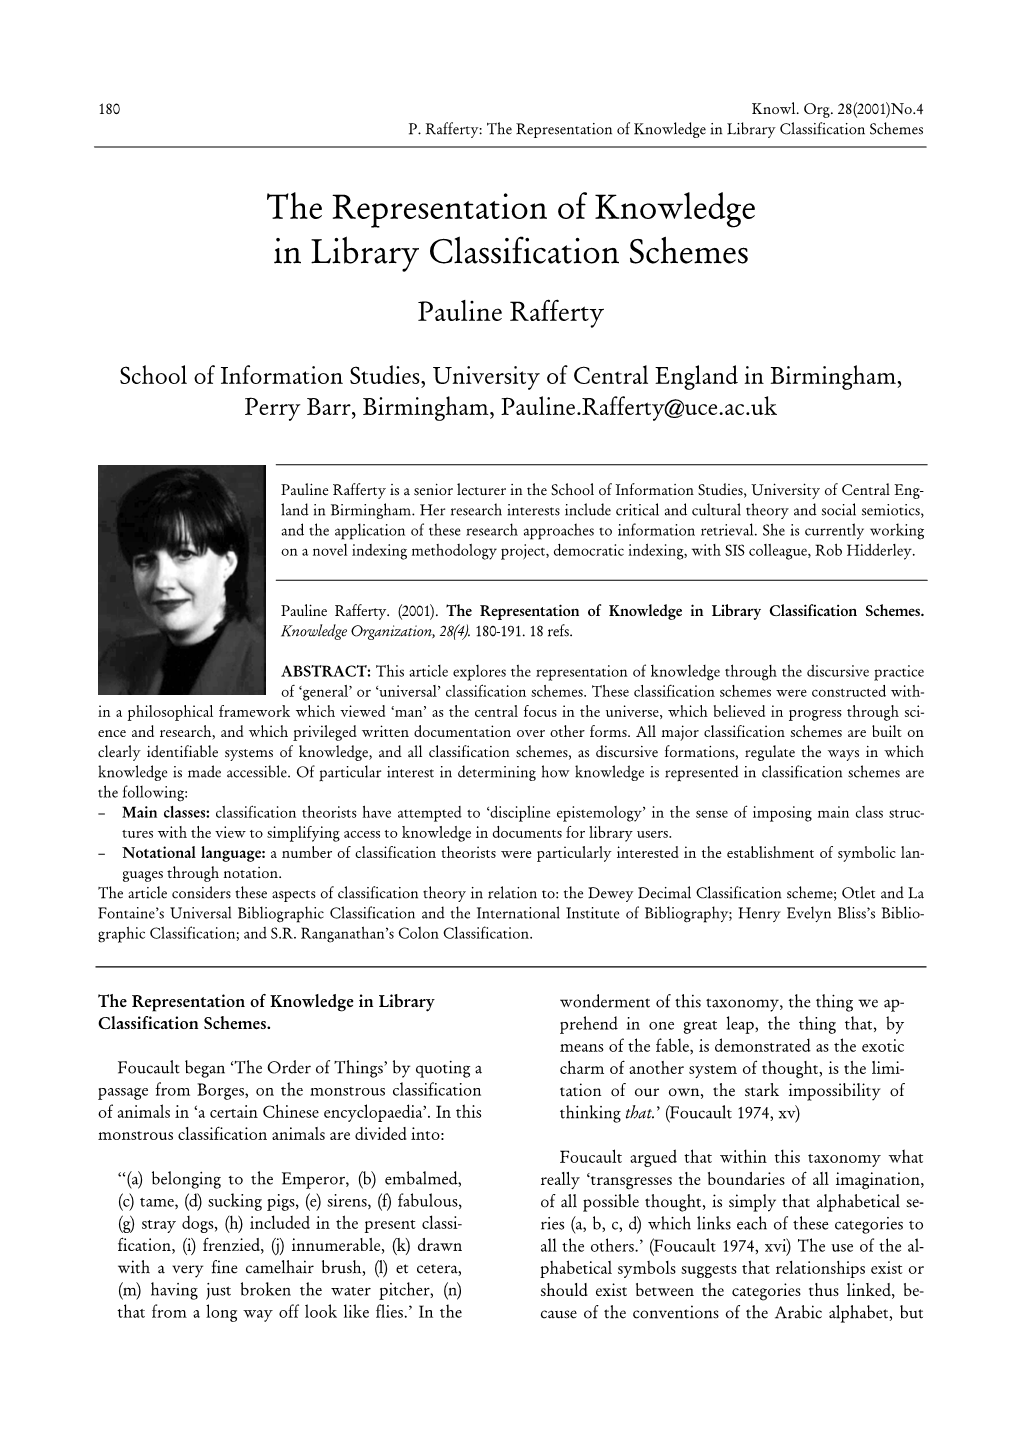 The Representation of Knowledge in Library Classification Schemes